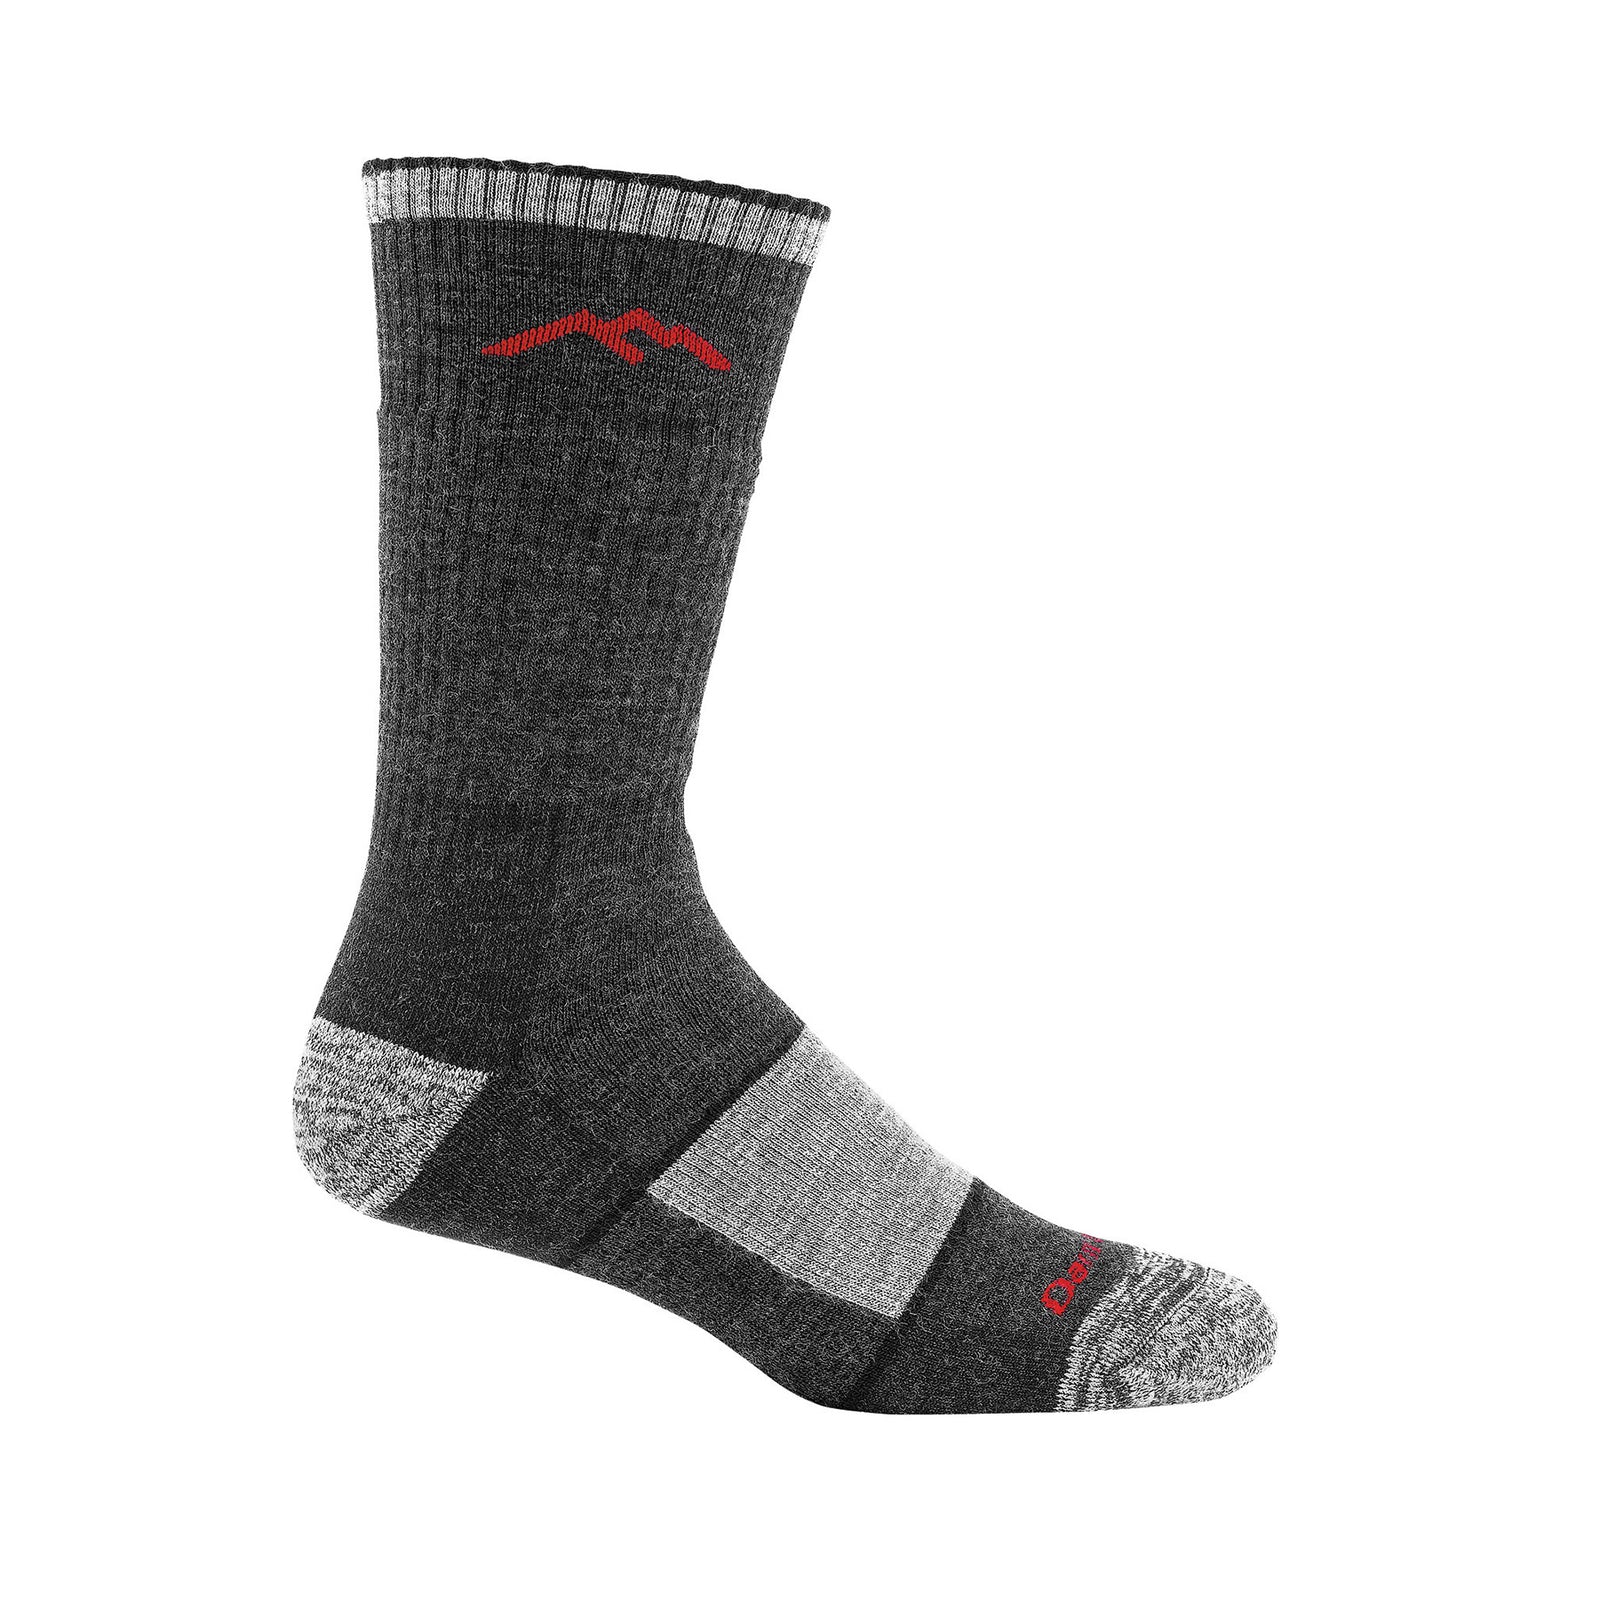 hiker boot sock full cushion sideview in color black and grey with red detail